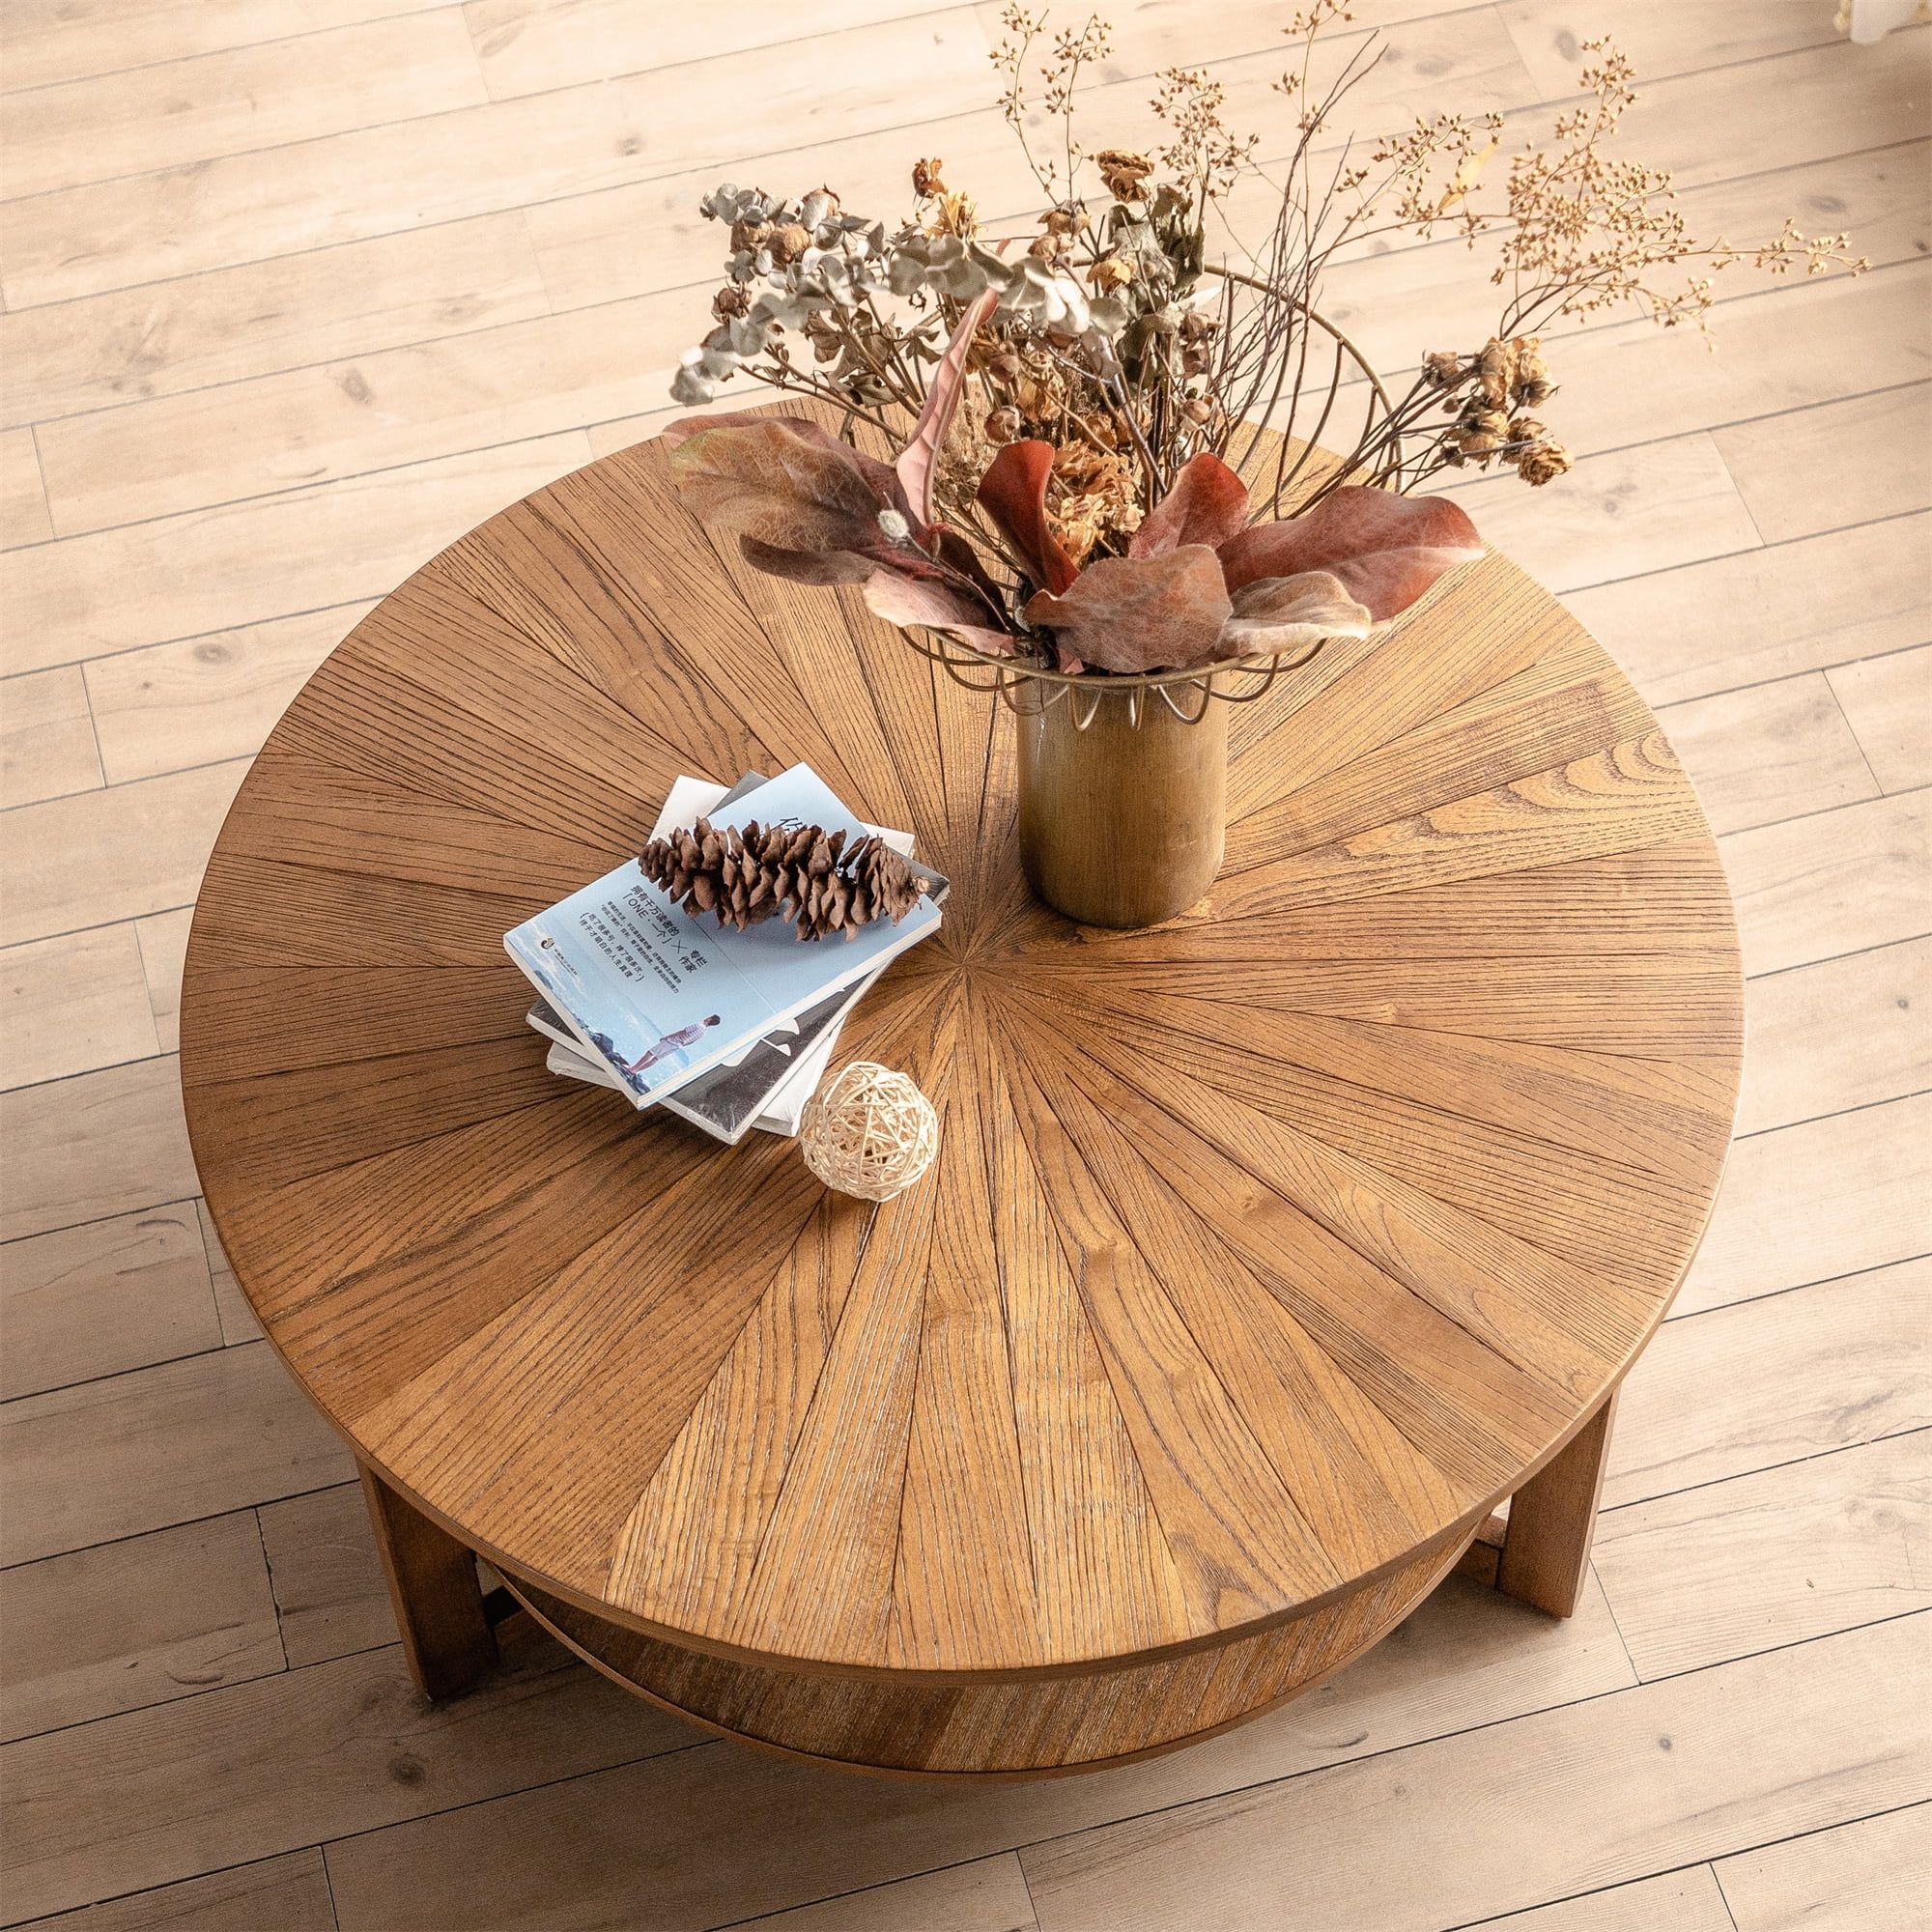 Gexpusm Round Coffee Table, Rustic Wood Coffee Table With Storage Shelf For  Living Room Bedroom, Brown Circle Coffee Table – Walmart Intended For Rustic Wood Coffee Tables (Photo 13 of 15)